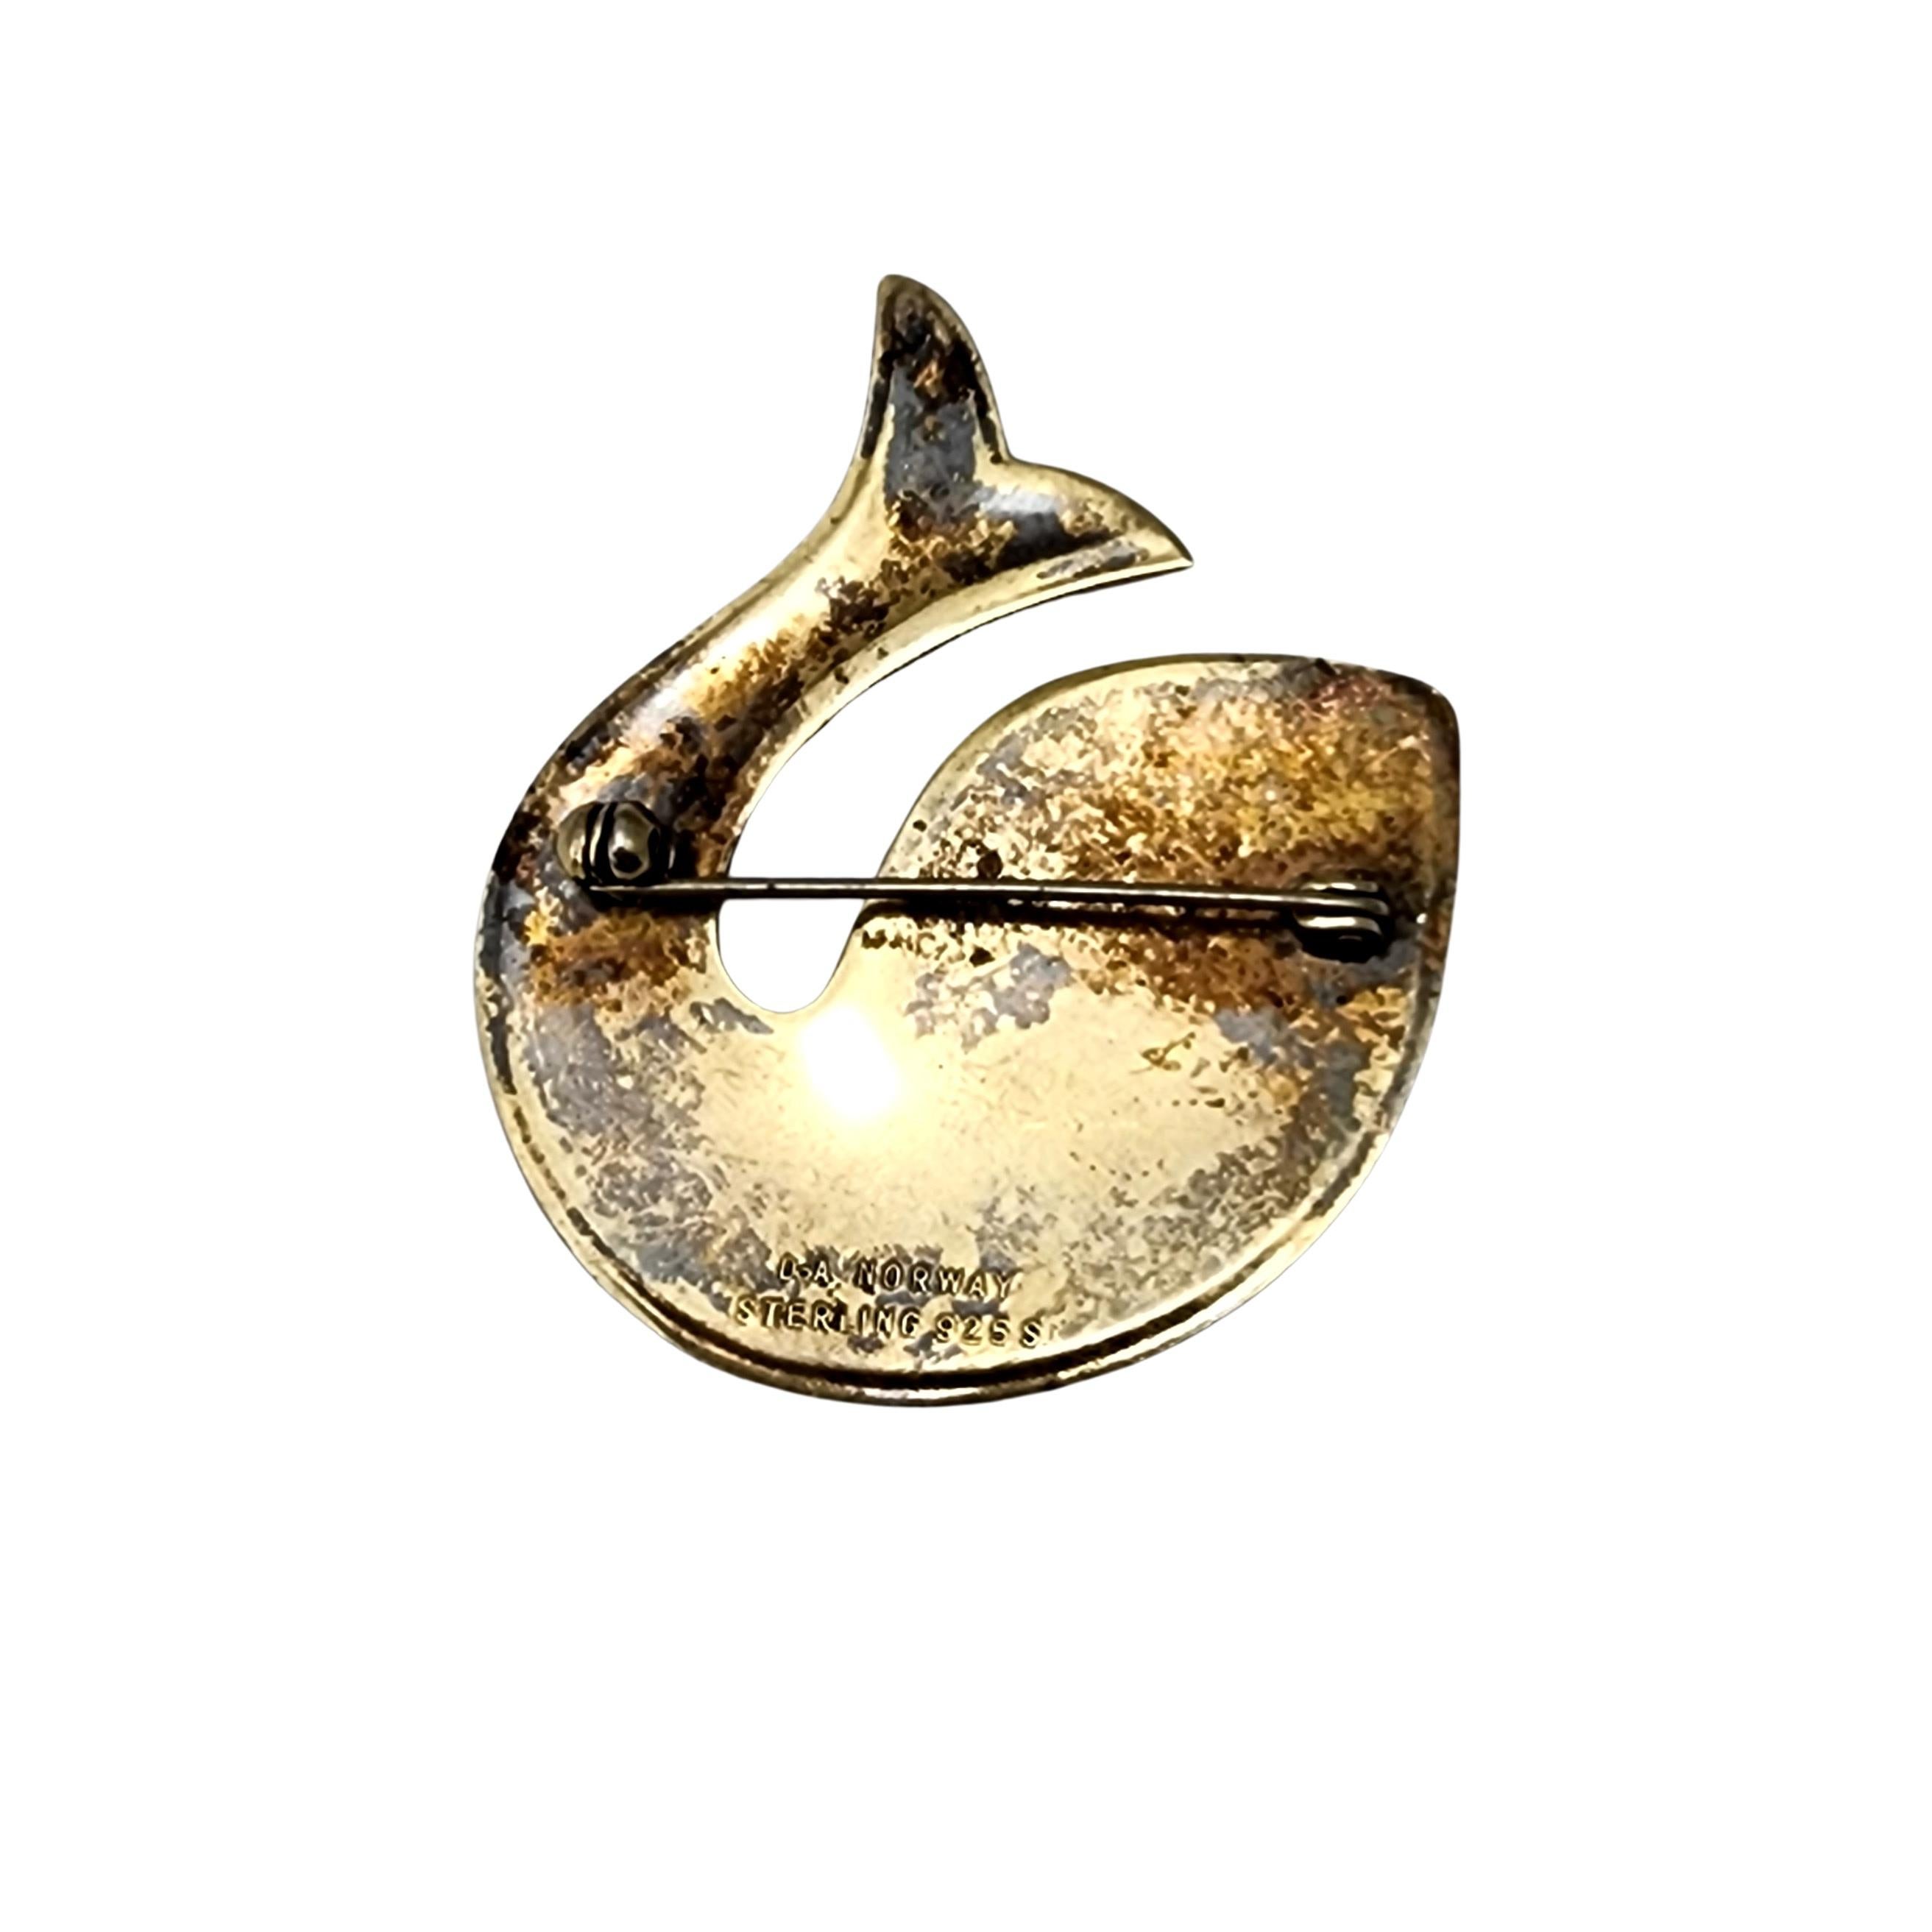 Vintage modernist sterling silver and enamel fish pin/brooch by David Andersen Norway.

This piece features beautiful enamel work with a gold vermeil over sterling silver in the shape of a splashing fish or whale.

Measures approx 1 3/4